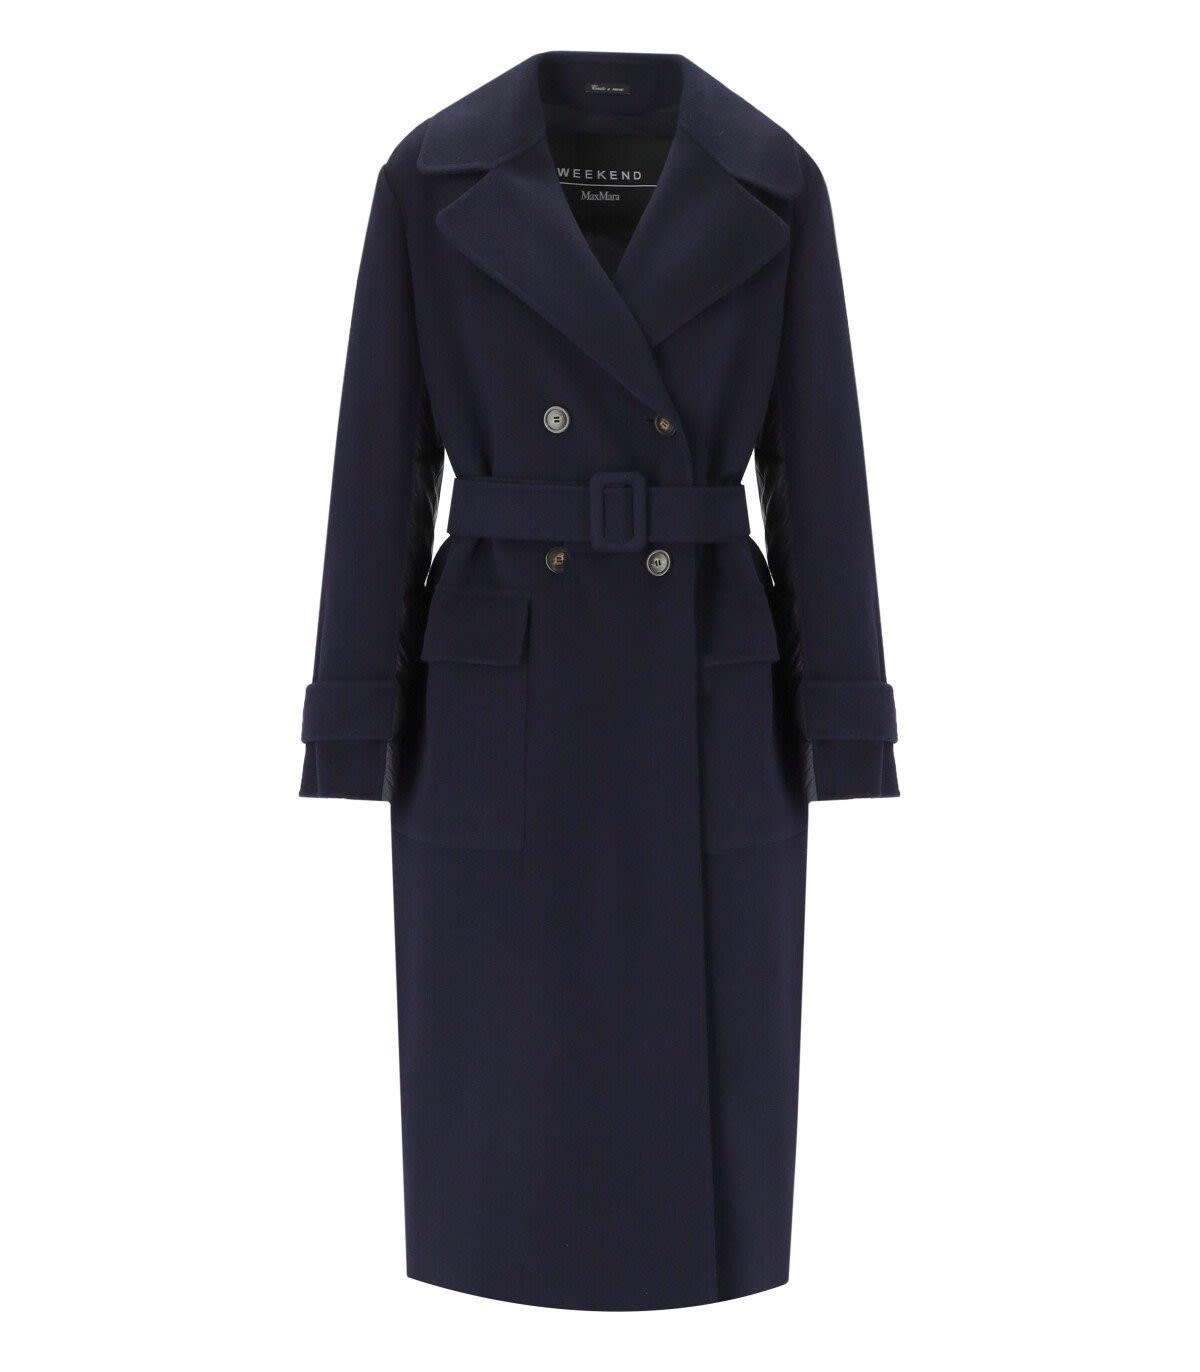 Weekend by Maxmara Tronto Blue Trench Coat | Lyst